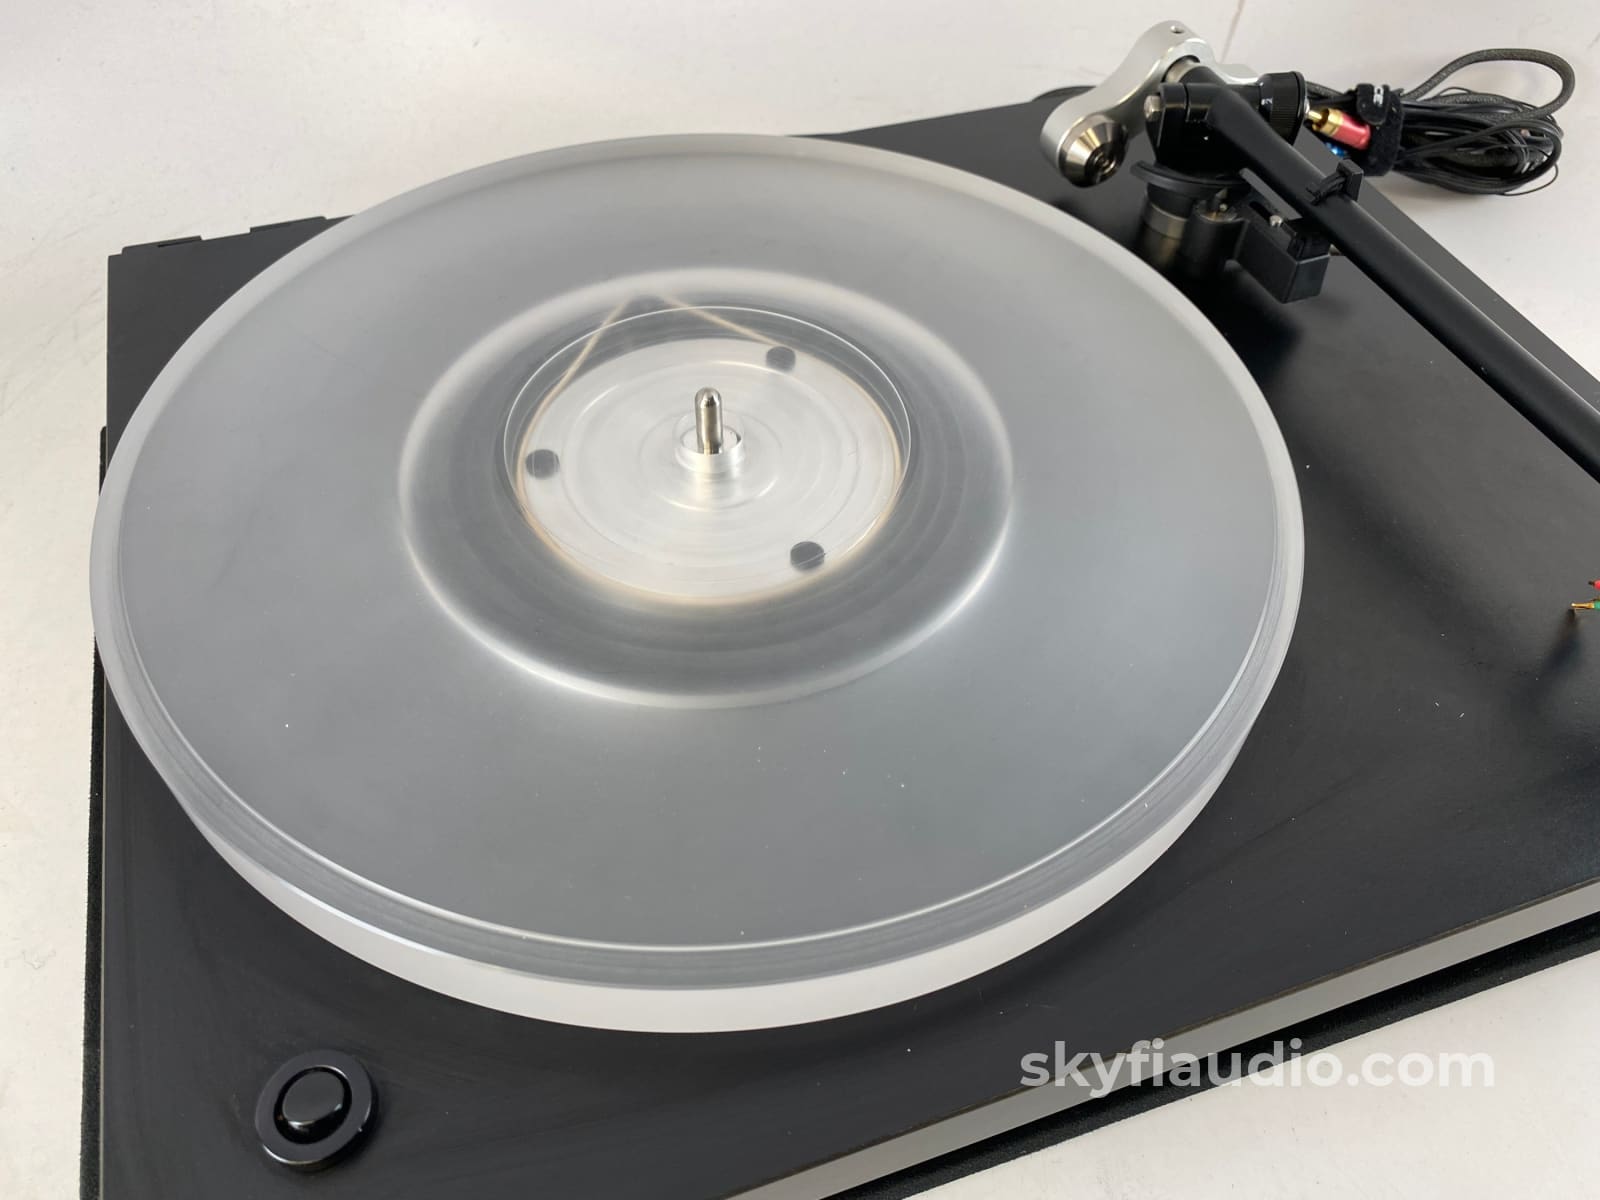 Rega Planar 3 With Tons Of Upgrades And New Sumiko Blue Point No. 2 Turntable